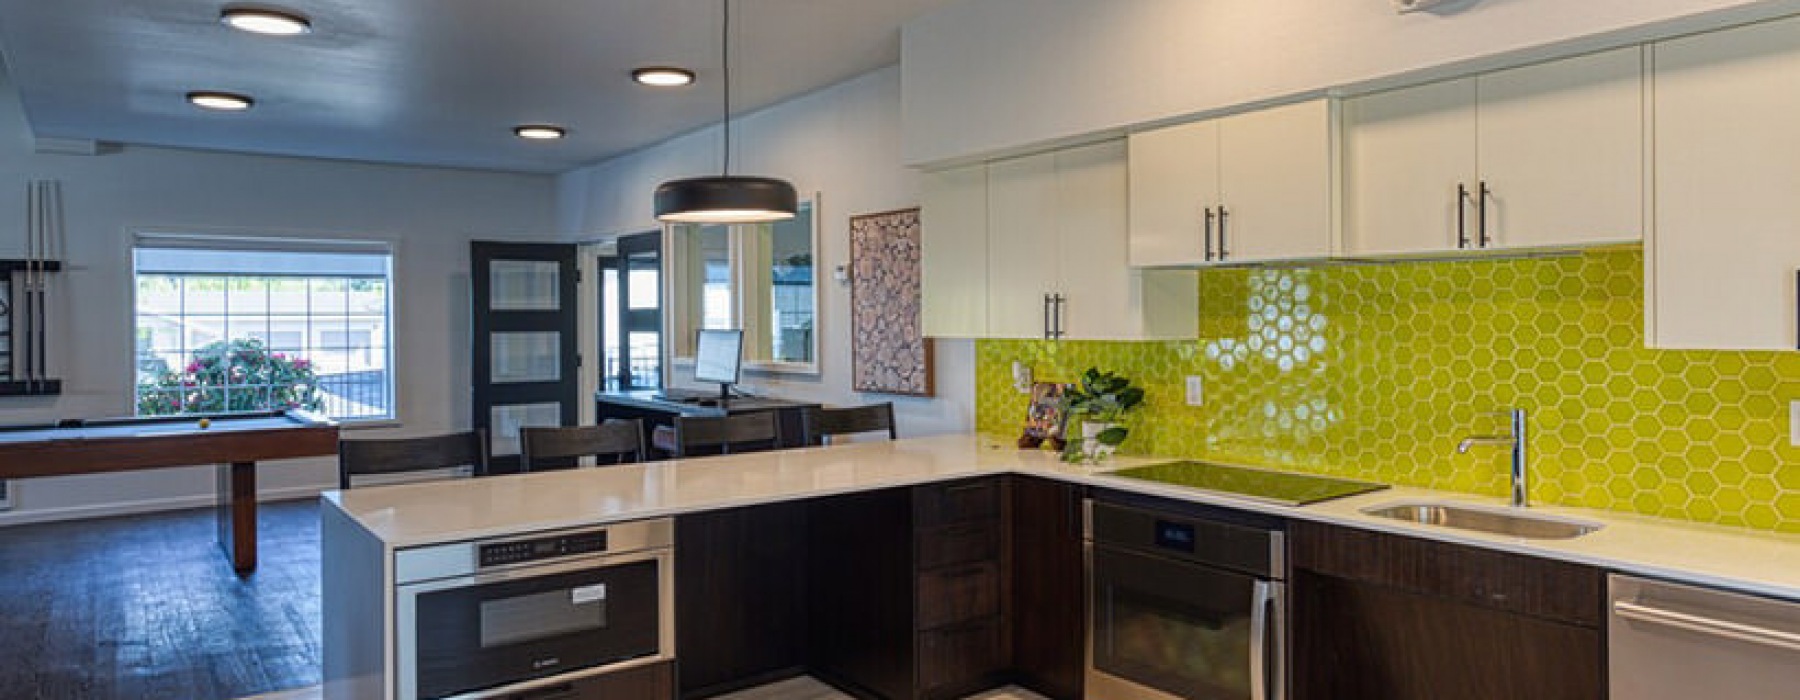 lighted clubhouse kitchen